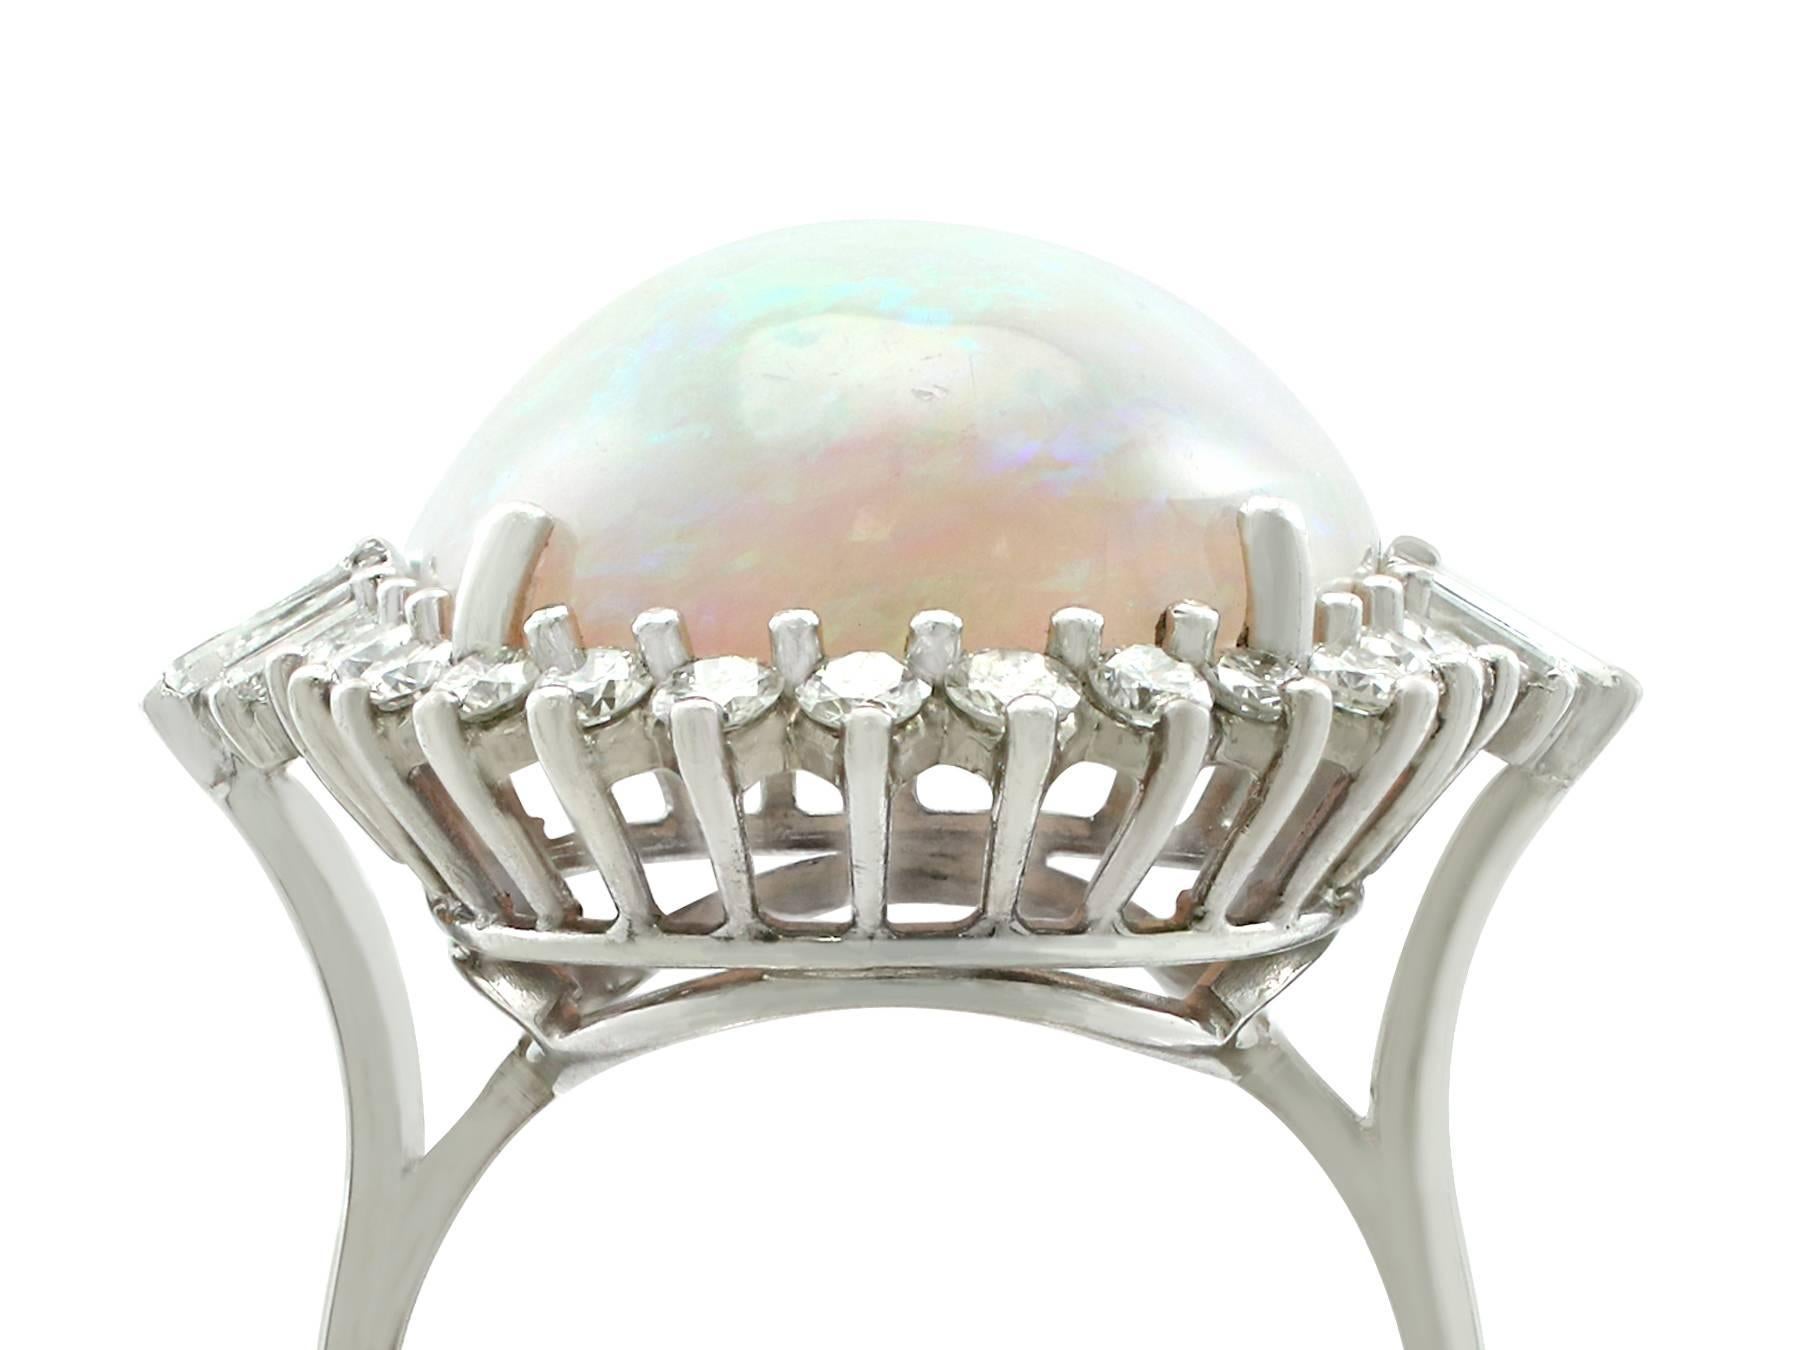 A stunning vintage 1960's 14.65 carat opal and 1.10 carat diamond, 18k white gold cluster style cocktail ring; part of 's diverse gemstone jewelry collections.

This stunning, fine and impressive large opal ring with diamonds has been crafted in 18k